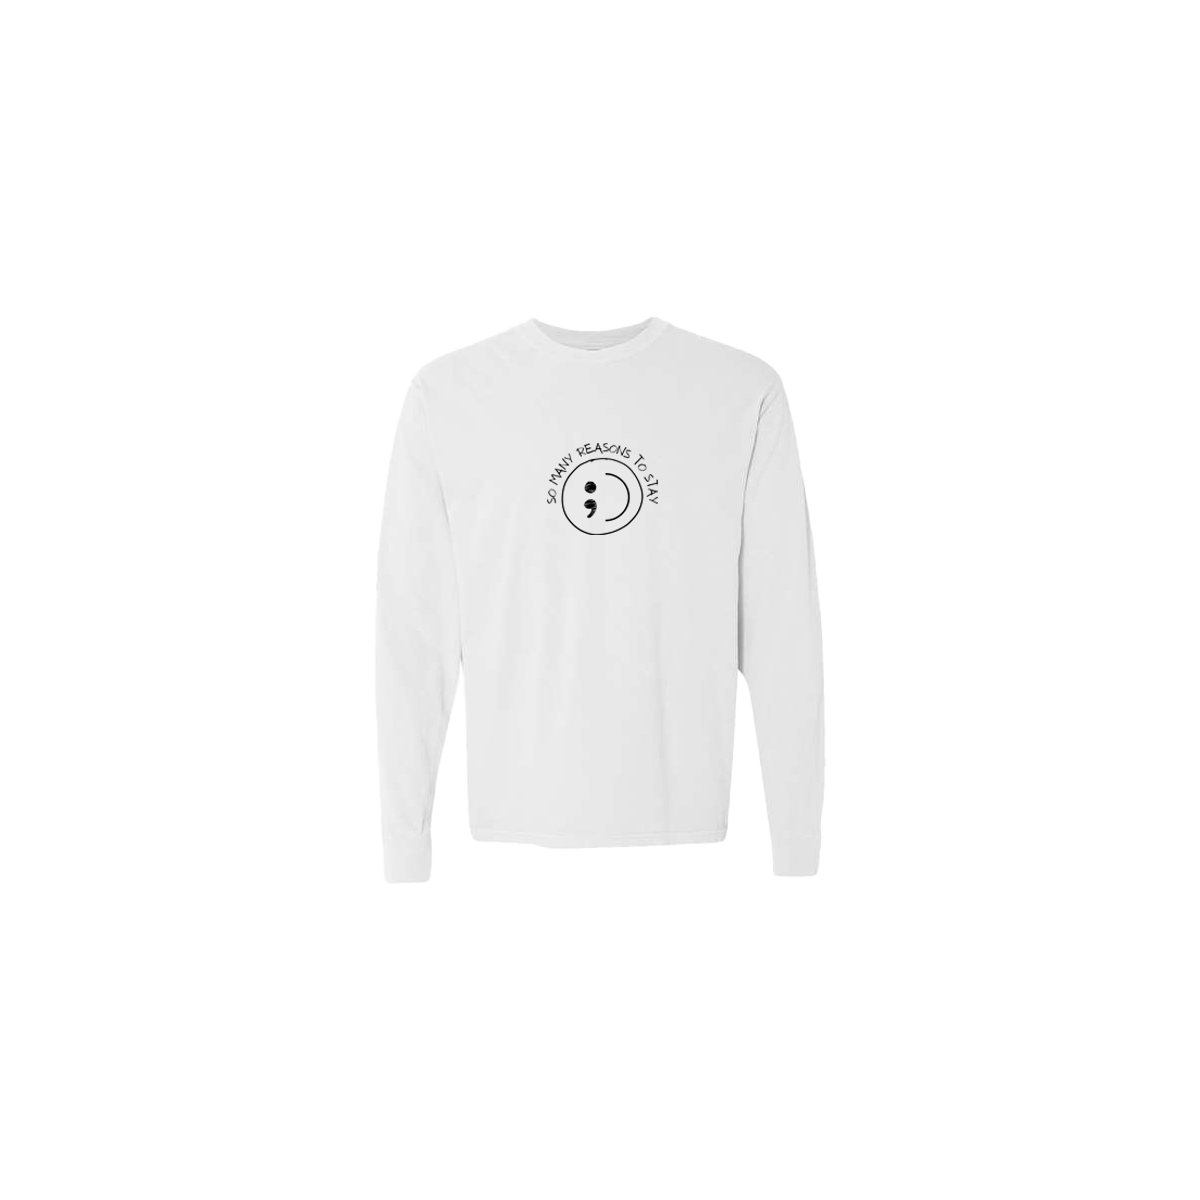 So Many Reasons to Stay Embroidered White Long Sleeve Tshirt - Mental Health Awareness Clothing